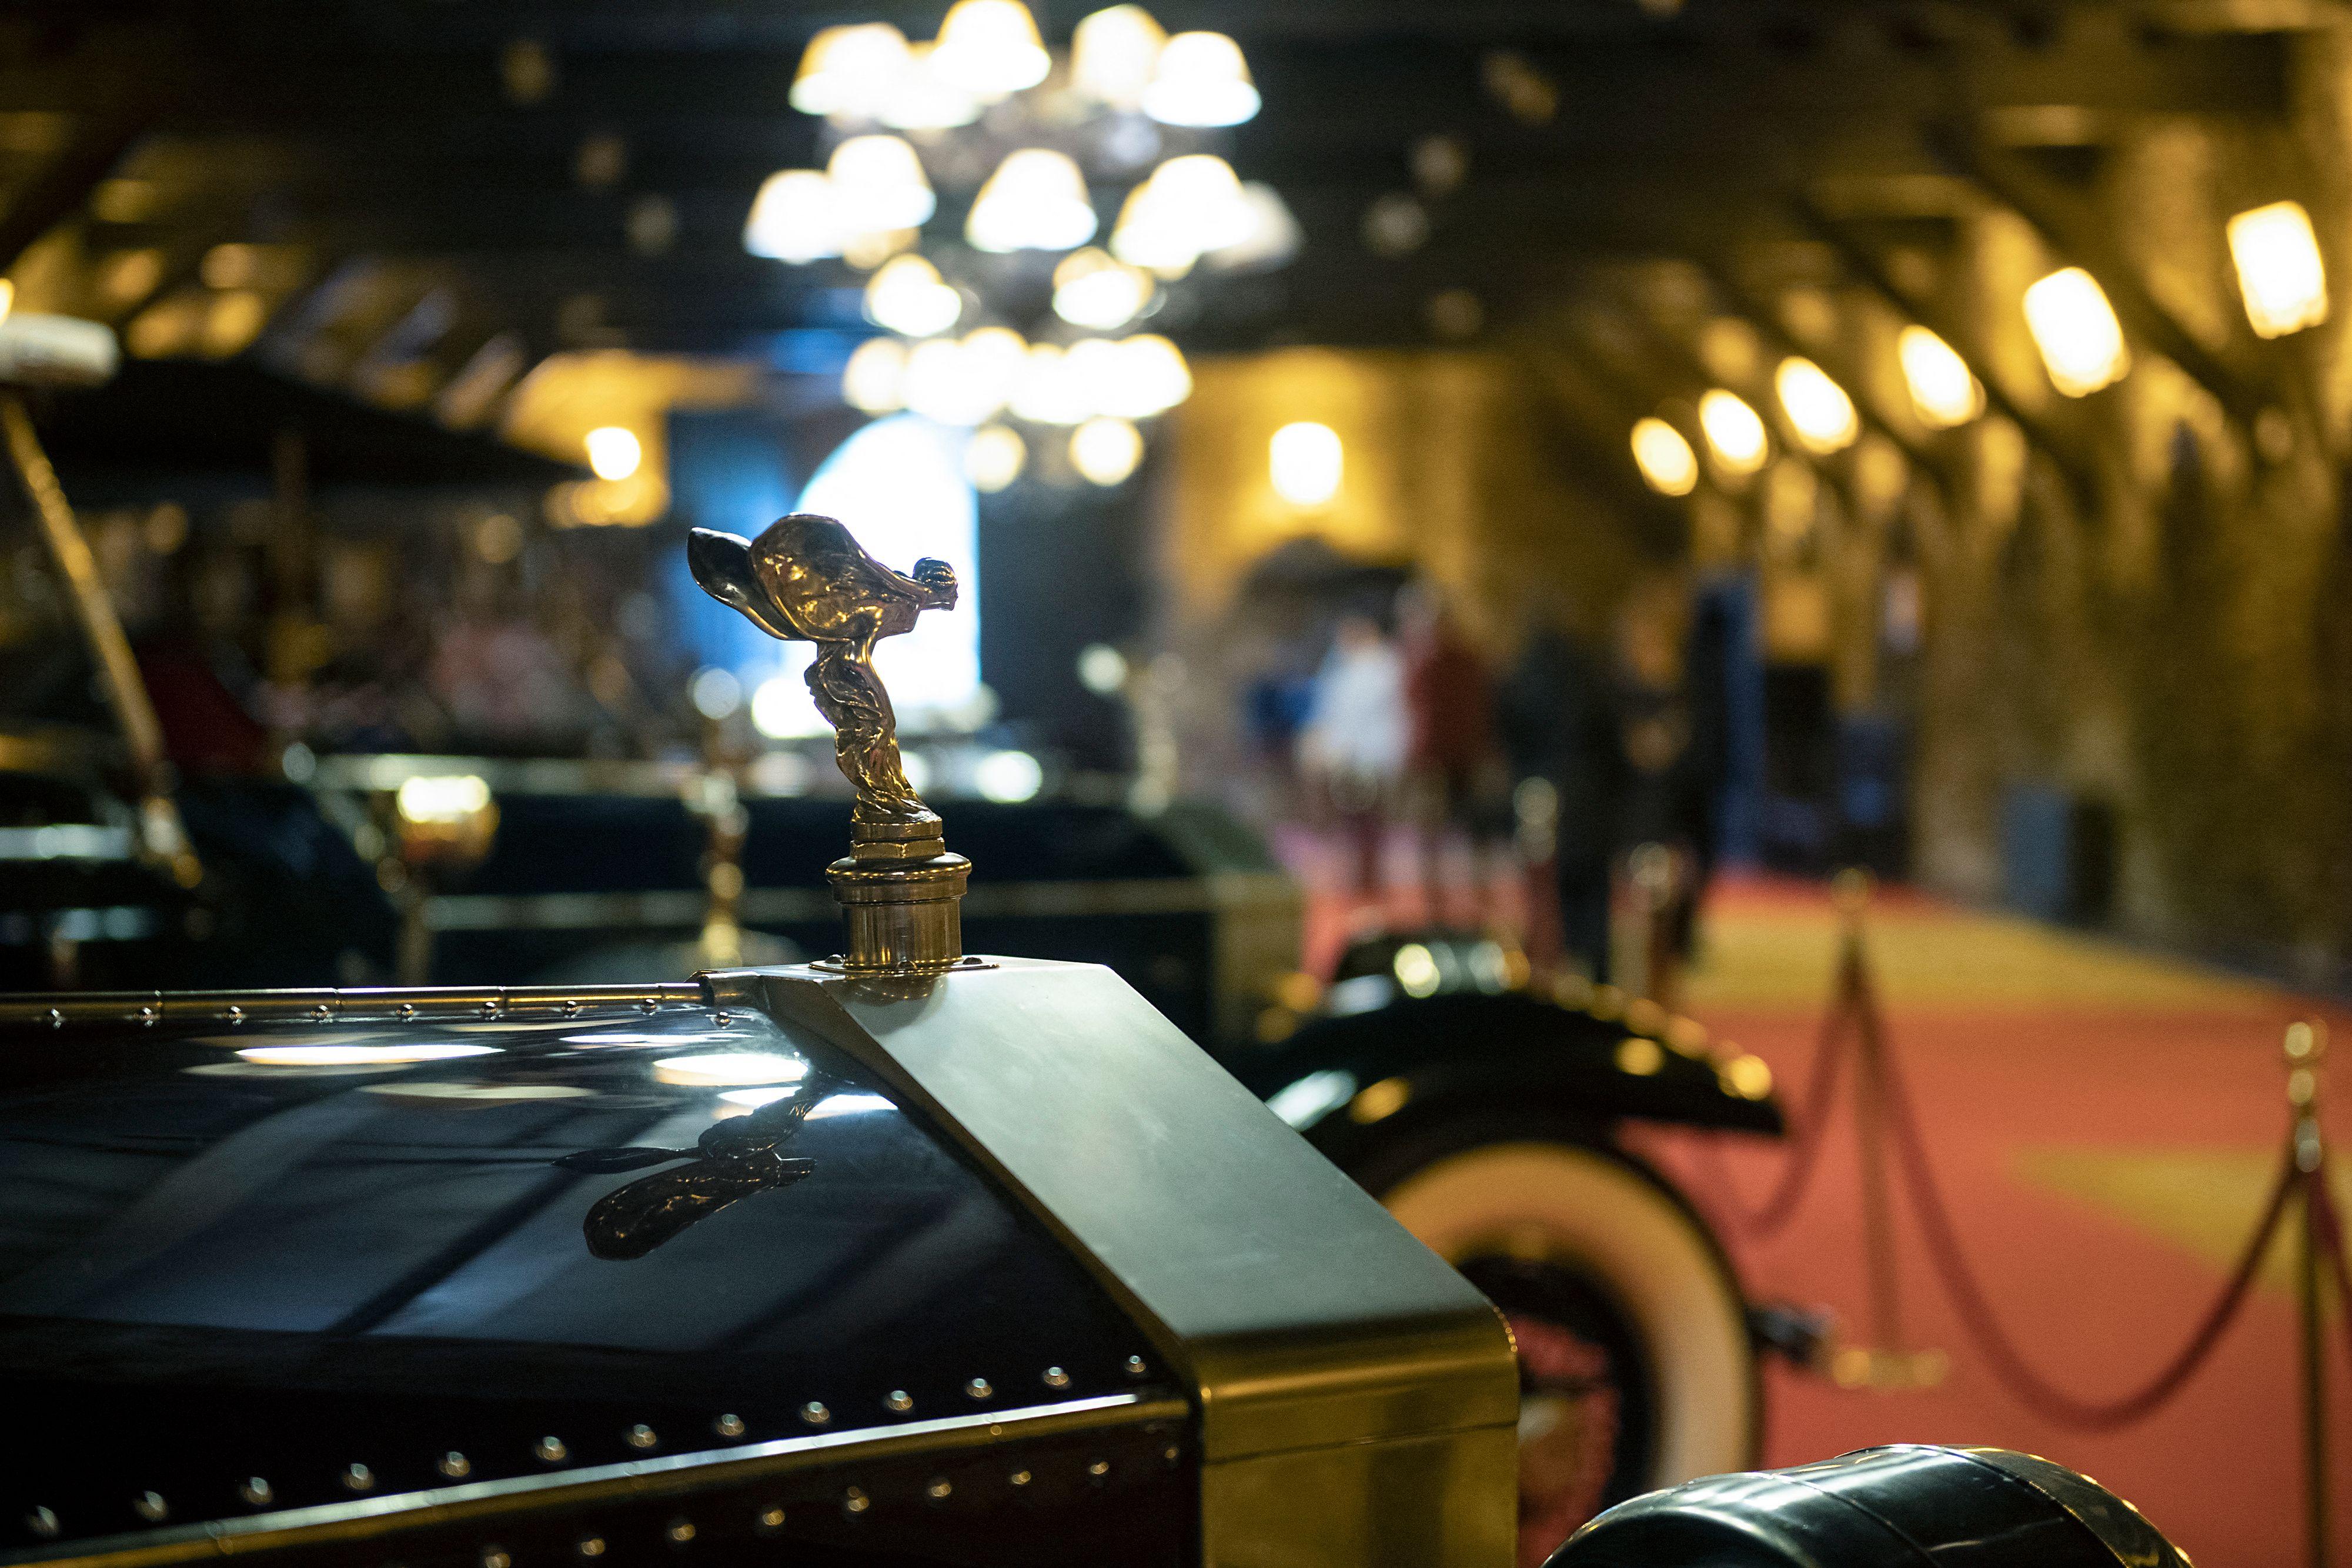 The Rolls Royce's 'Flying lady' symbol is seen on a Rolls Royce Silver Ghost Springfield Limousine Sedanca model manufactured in 1924 at the Torre Loizaga Museum in the Spanish Basque town of Galdames, near Bilbao on November 27, 2022. 